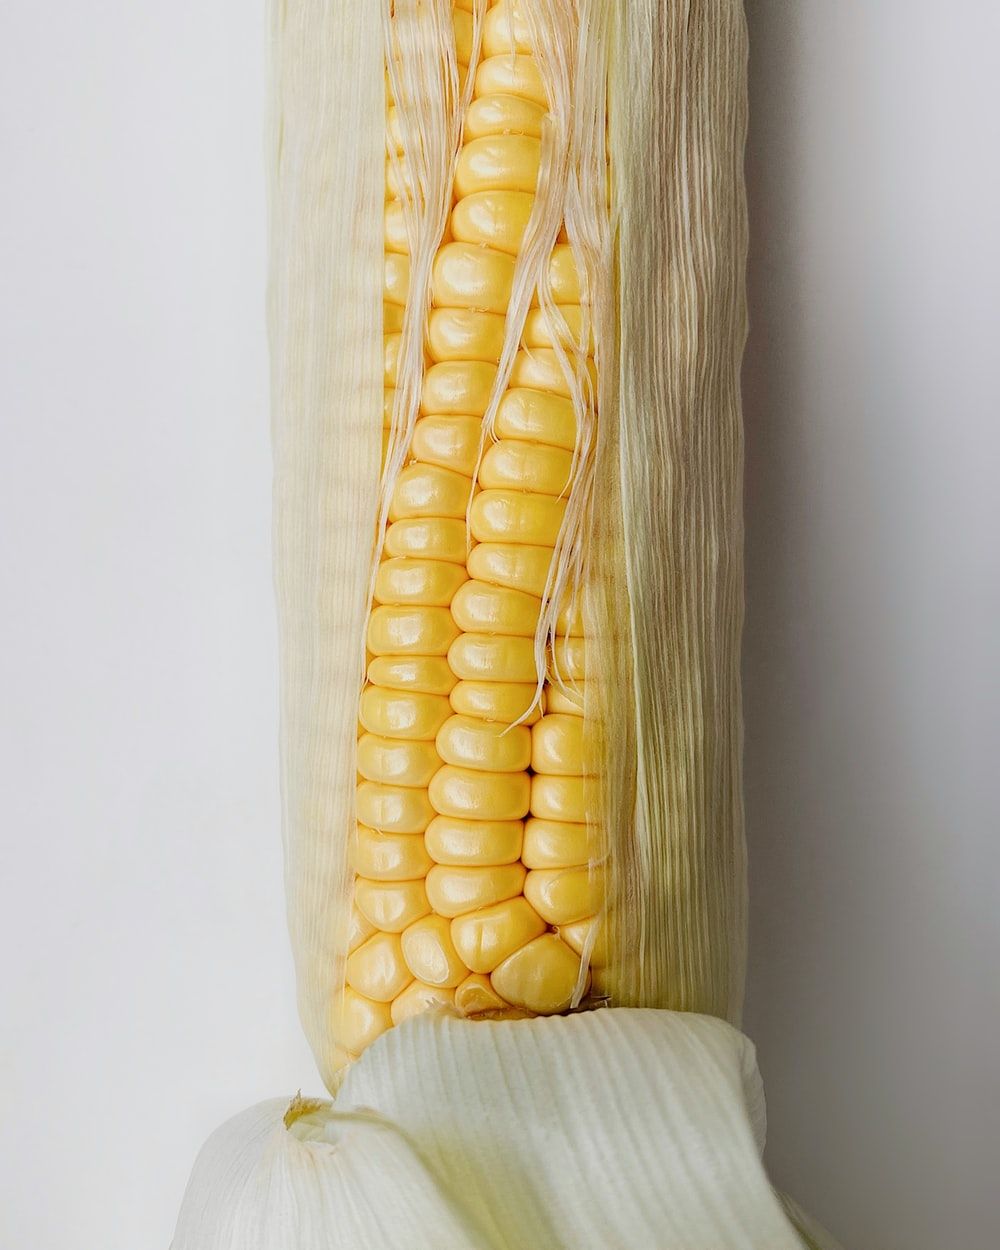 Sweet Corn Picture. Download Free Image